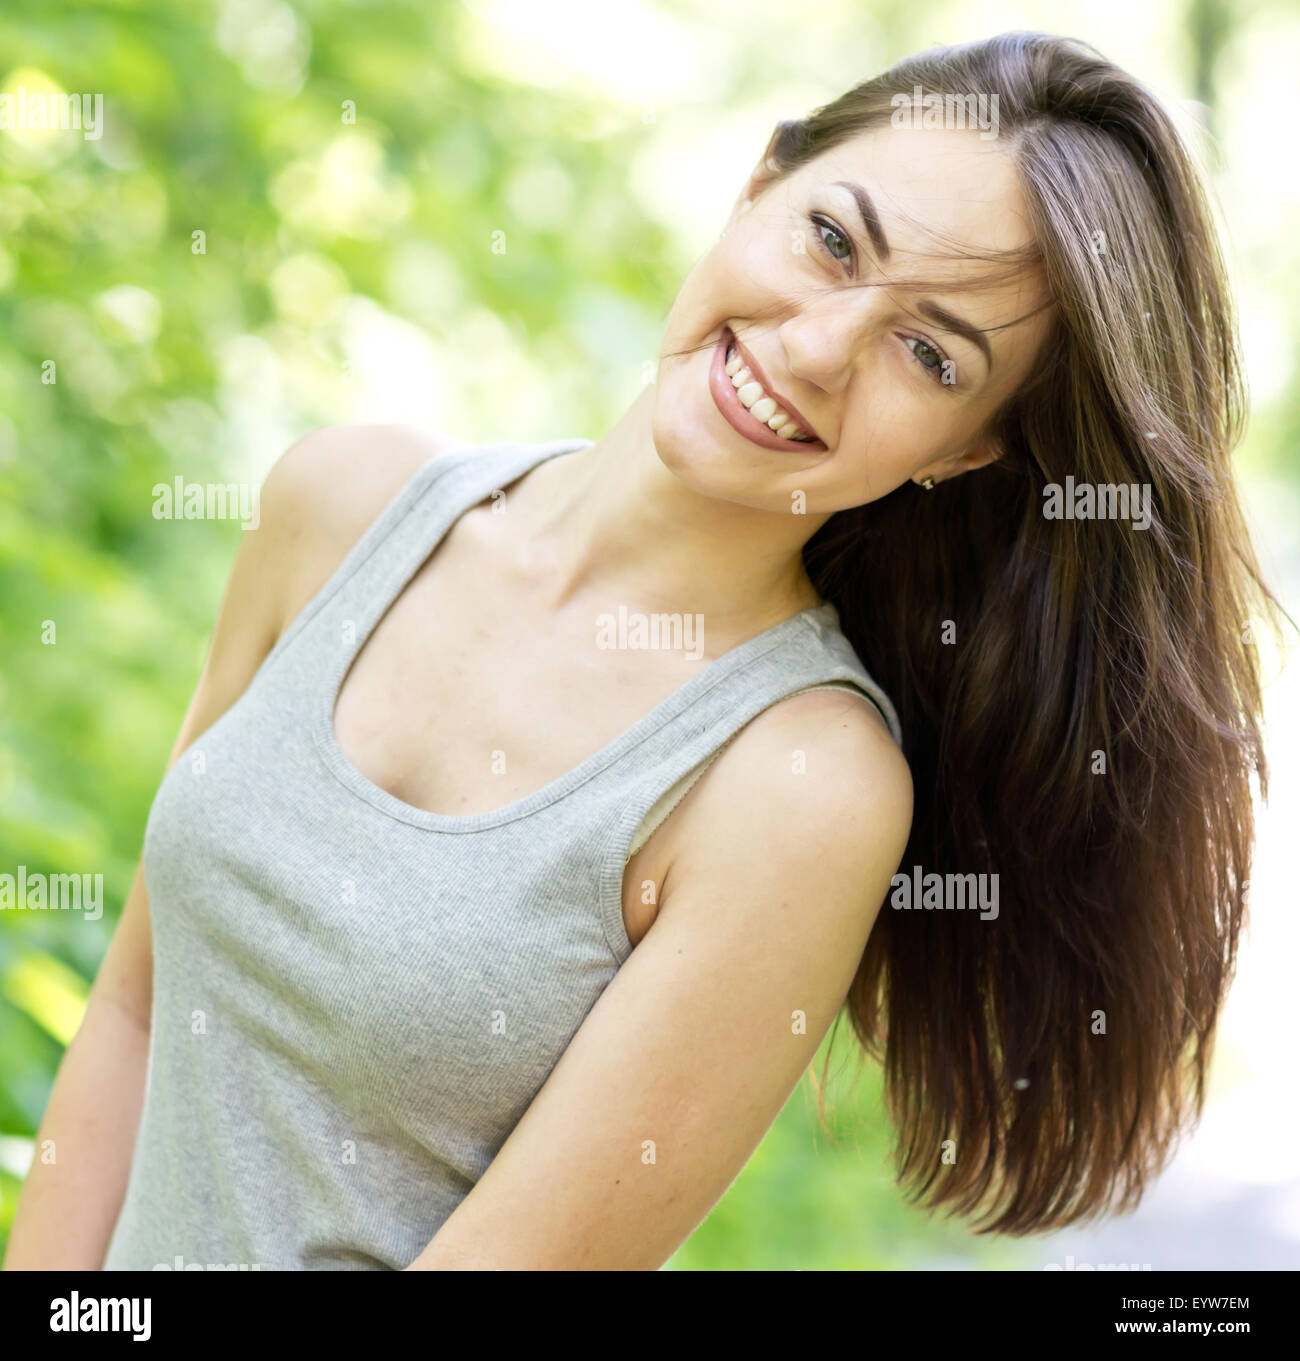 portrait of young beautiful laughing woman Stock Photo